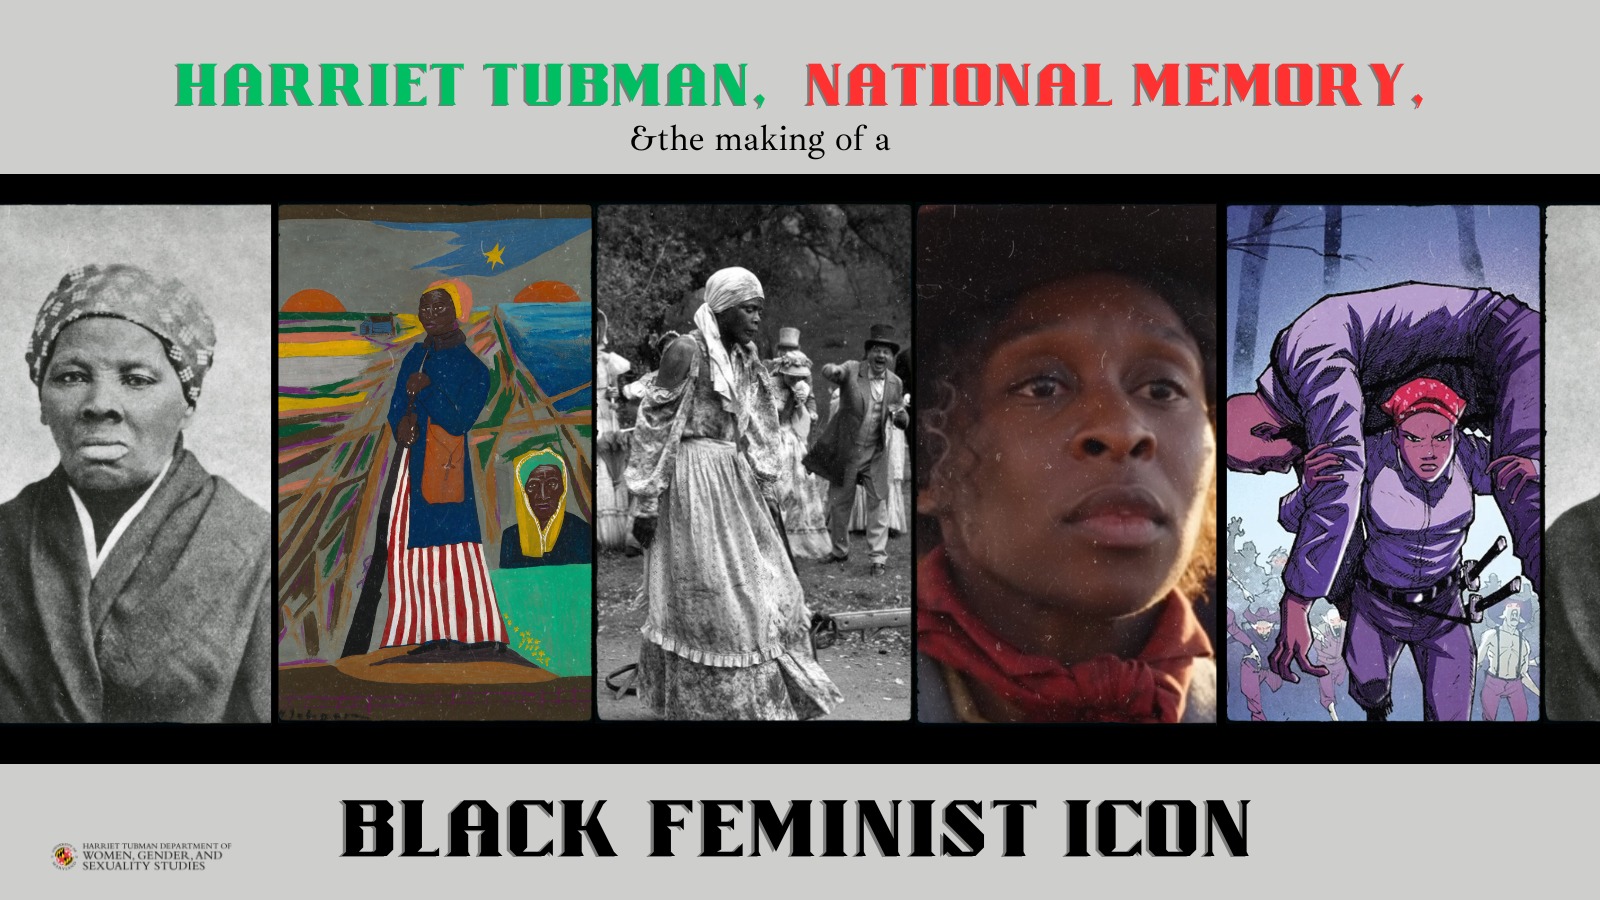 film roll of several popular depictions of Harriet Tubman and the title Harriet Tubman, National Memory, & the Making of Black Feminist Icon